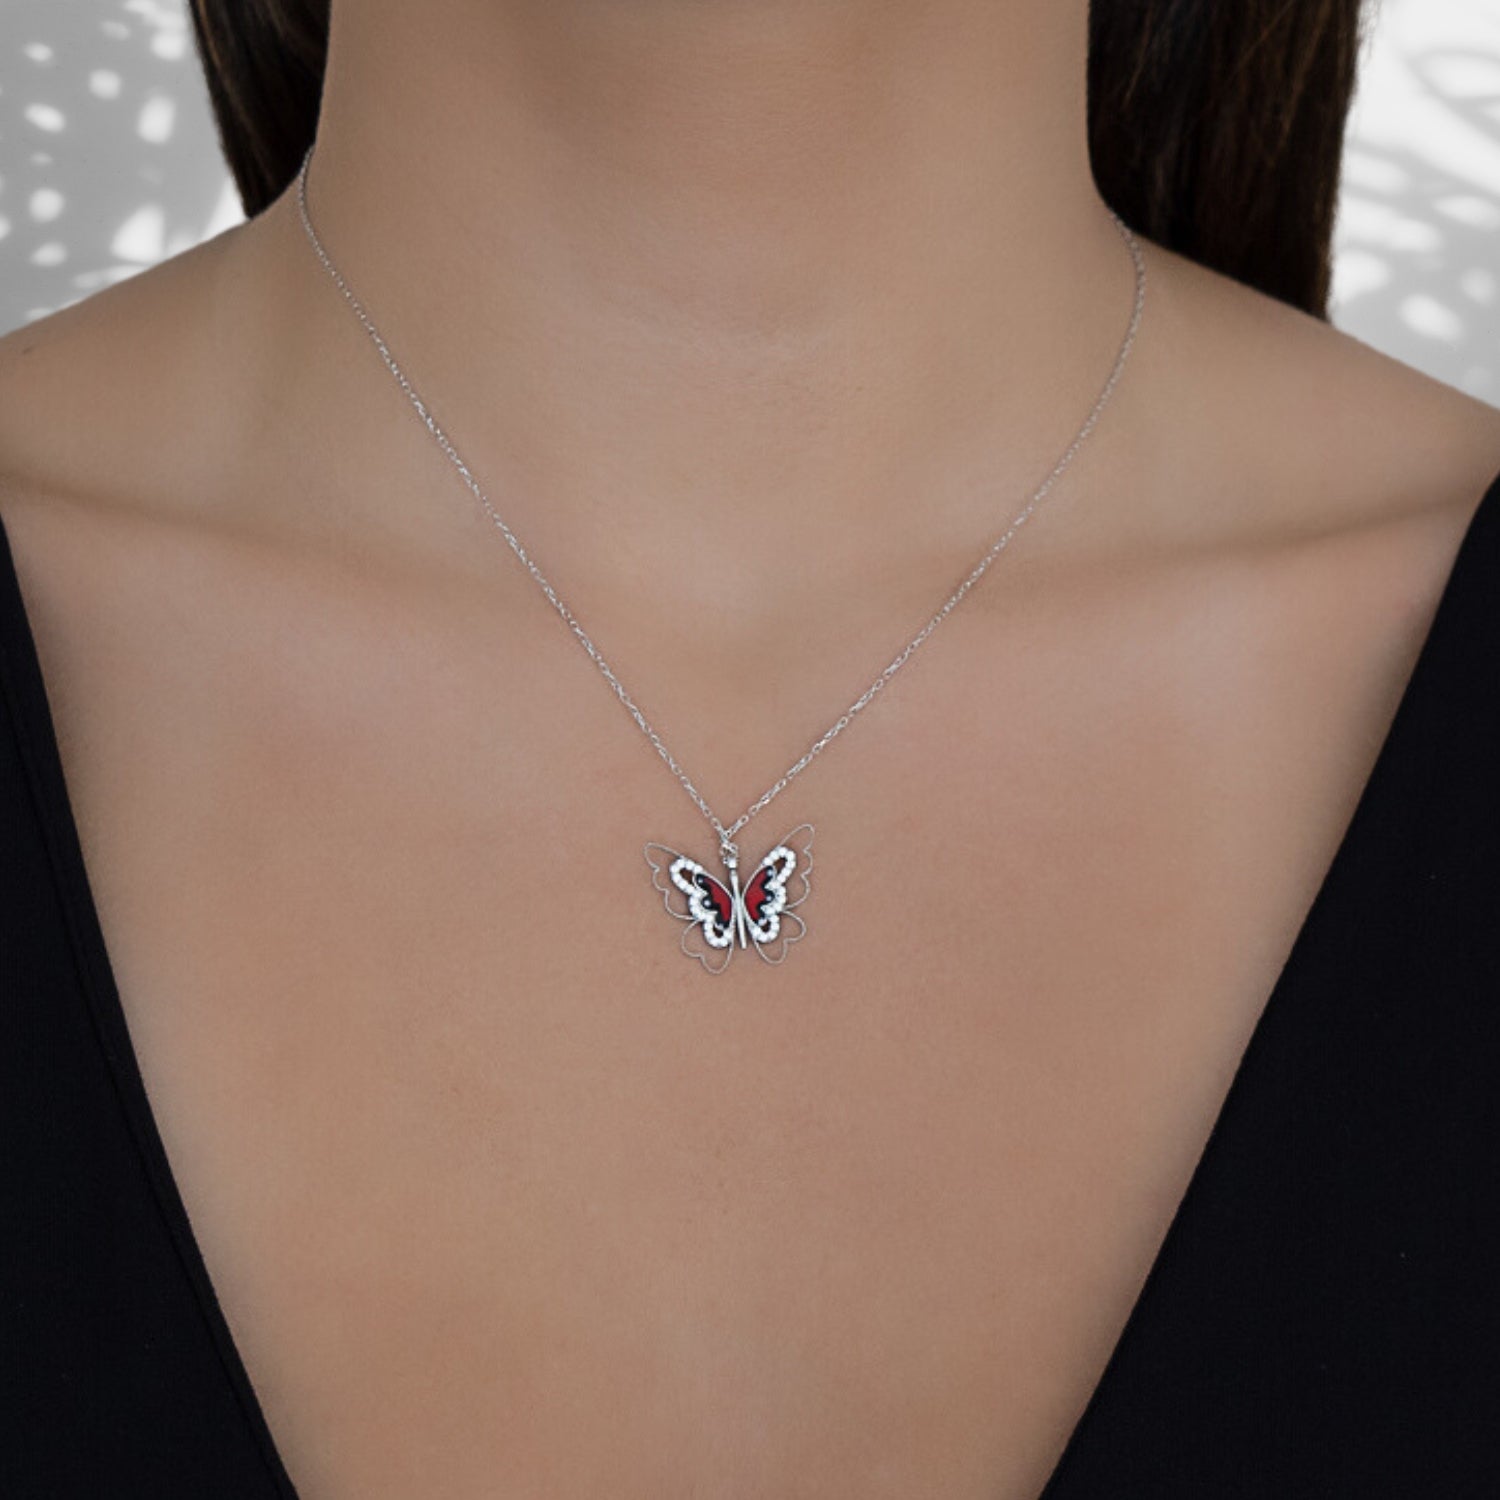 A model wearing the Sterling Silver Peace Red Butterfly Necklace, showcasing its elegance and symbolism.